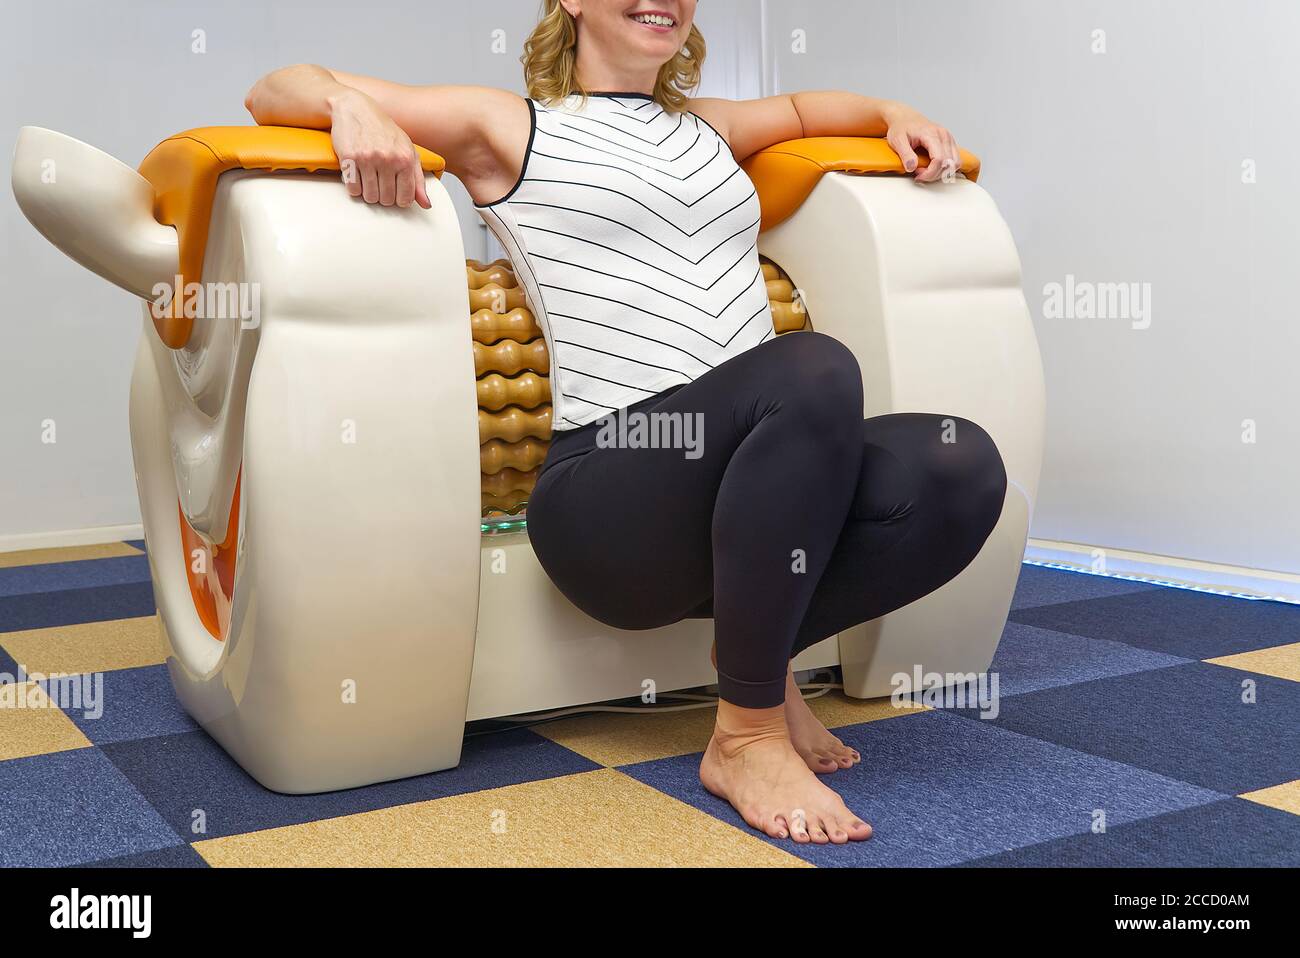 https://c8.alamy.com/comp/2CCD0AM/smiling-woman-making-massage-for-back-roll-massage-machine-is-a-way-to-shape-the-figure-skin-care-body-care-concept-modern-relax-massage-equipment-2CCD0AM.jpg